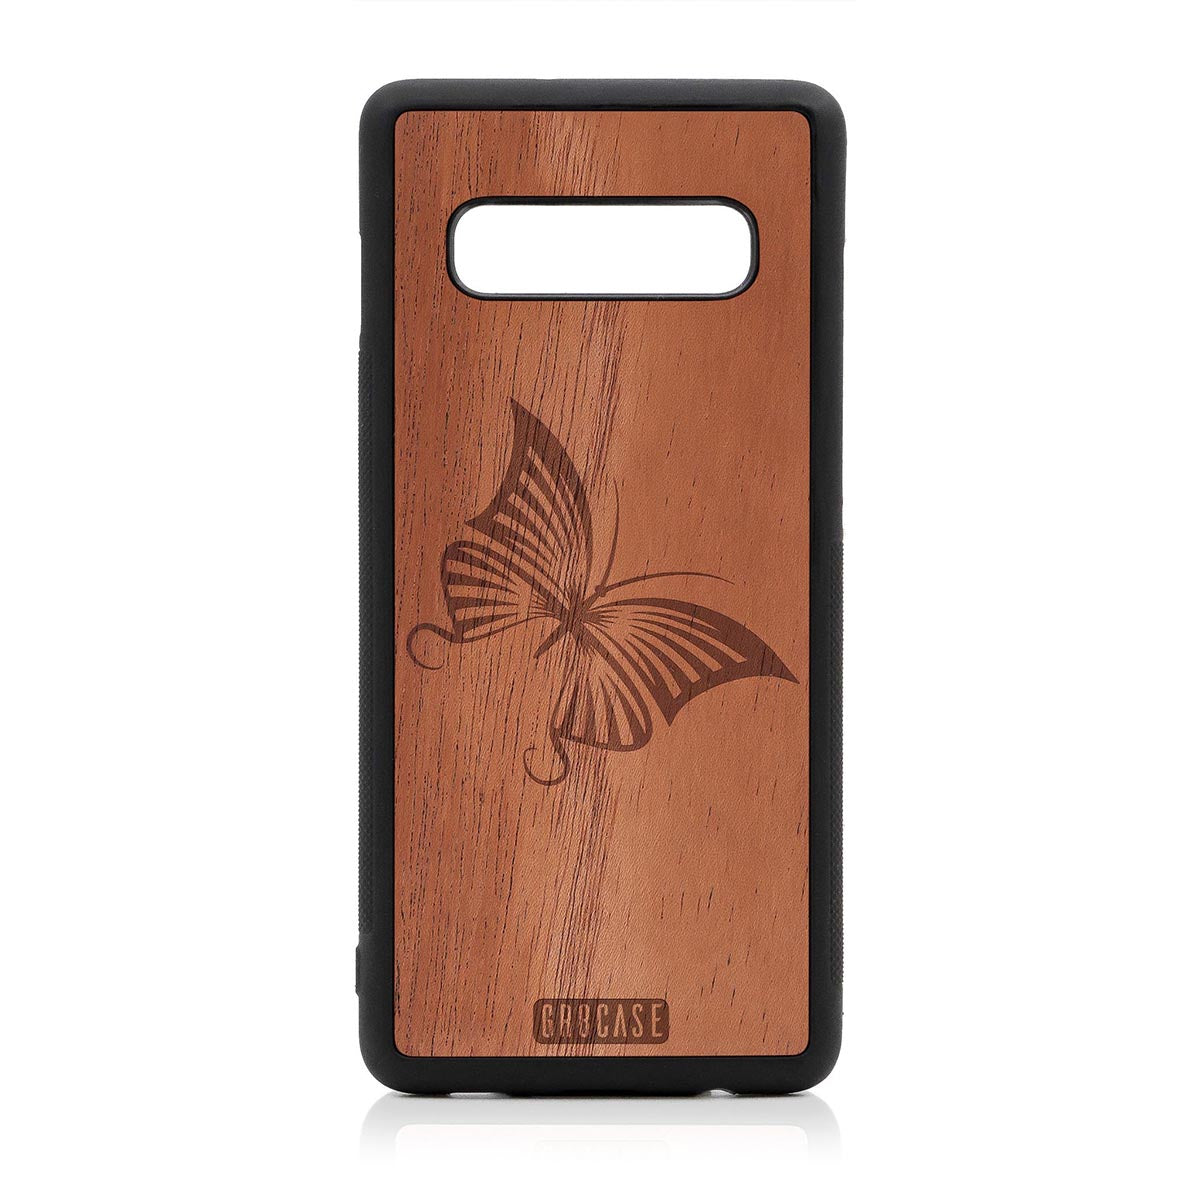 Butterfly Design Wood Case Samsung Galaxy S10 Plus by GR8CASE